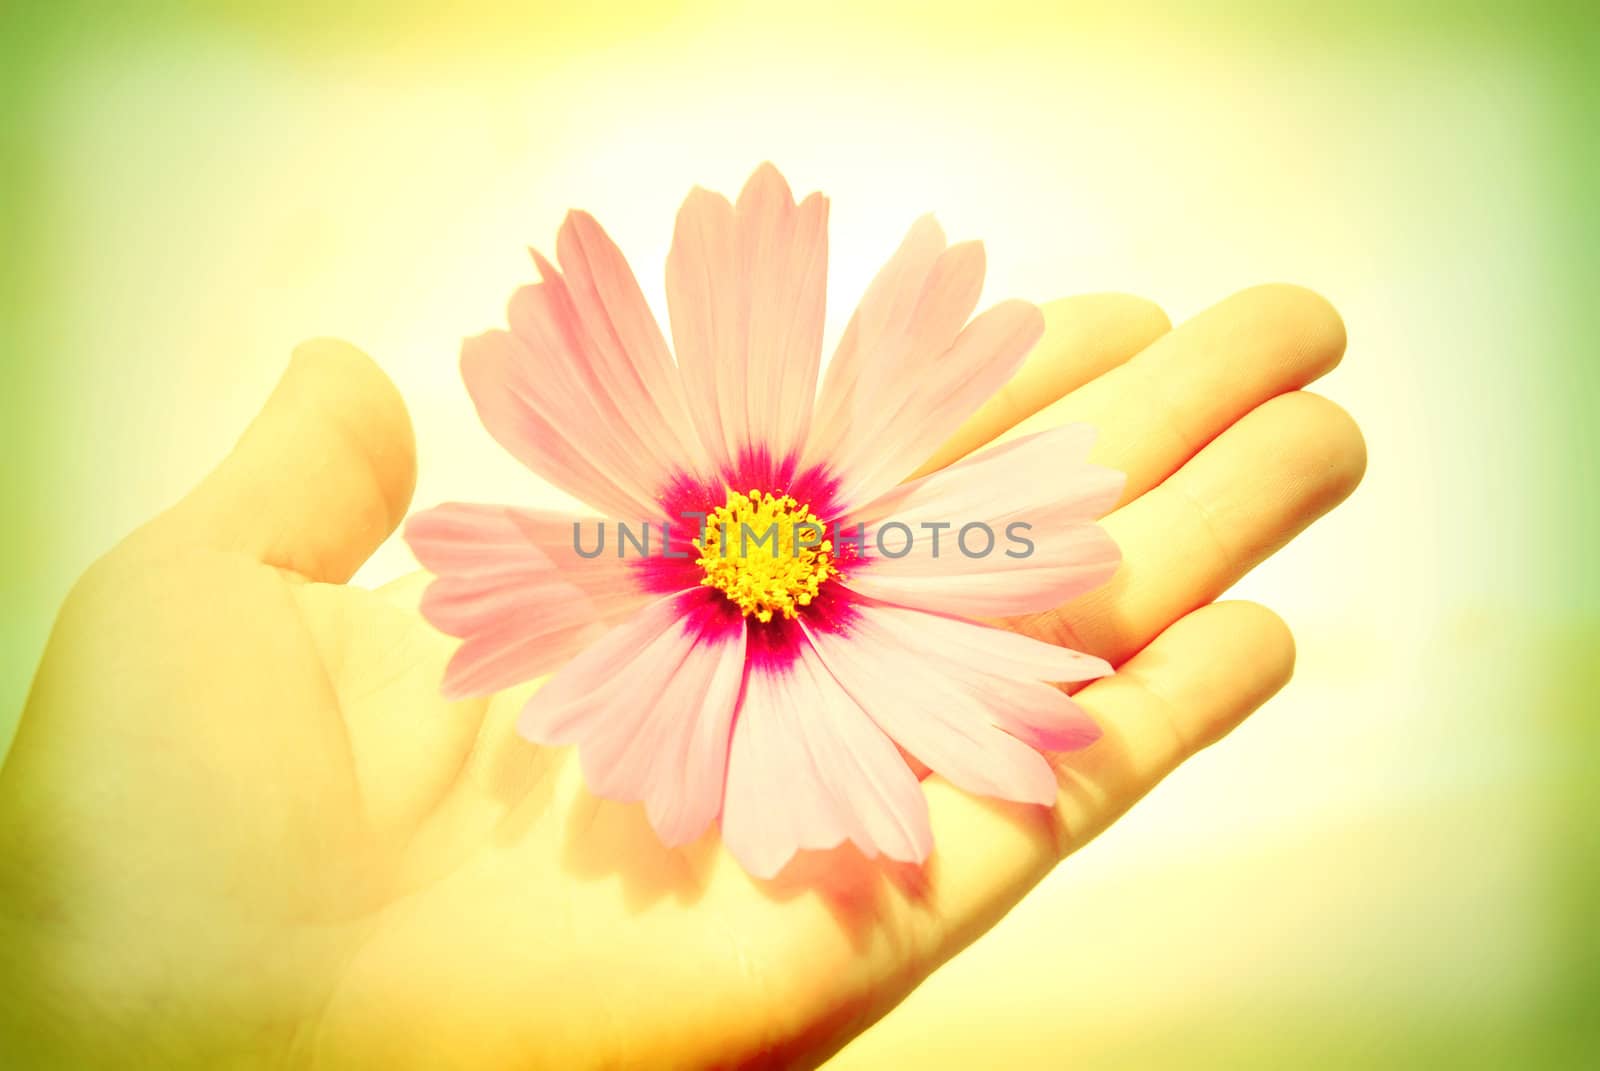 I offer my friendship, hand extended with a flower